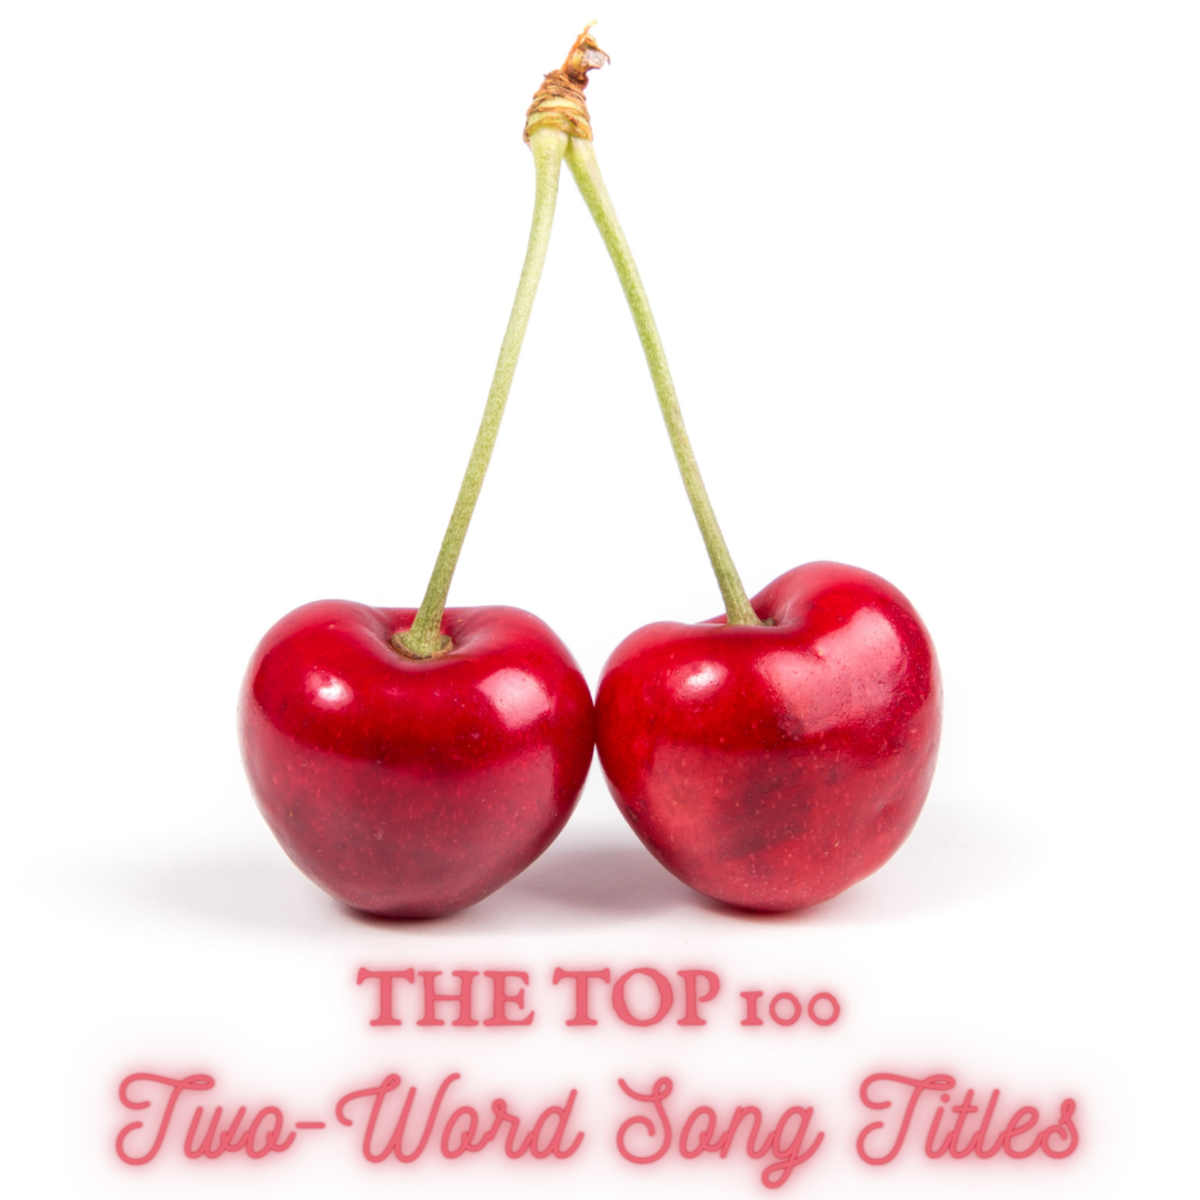 100 Best Songs With Two-Word Titles